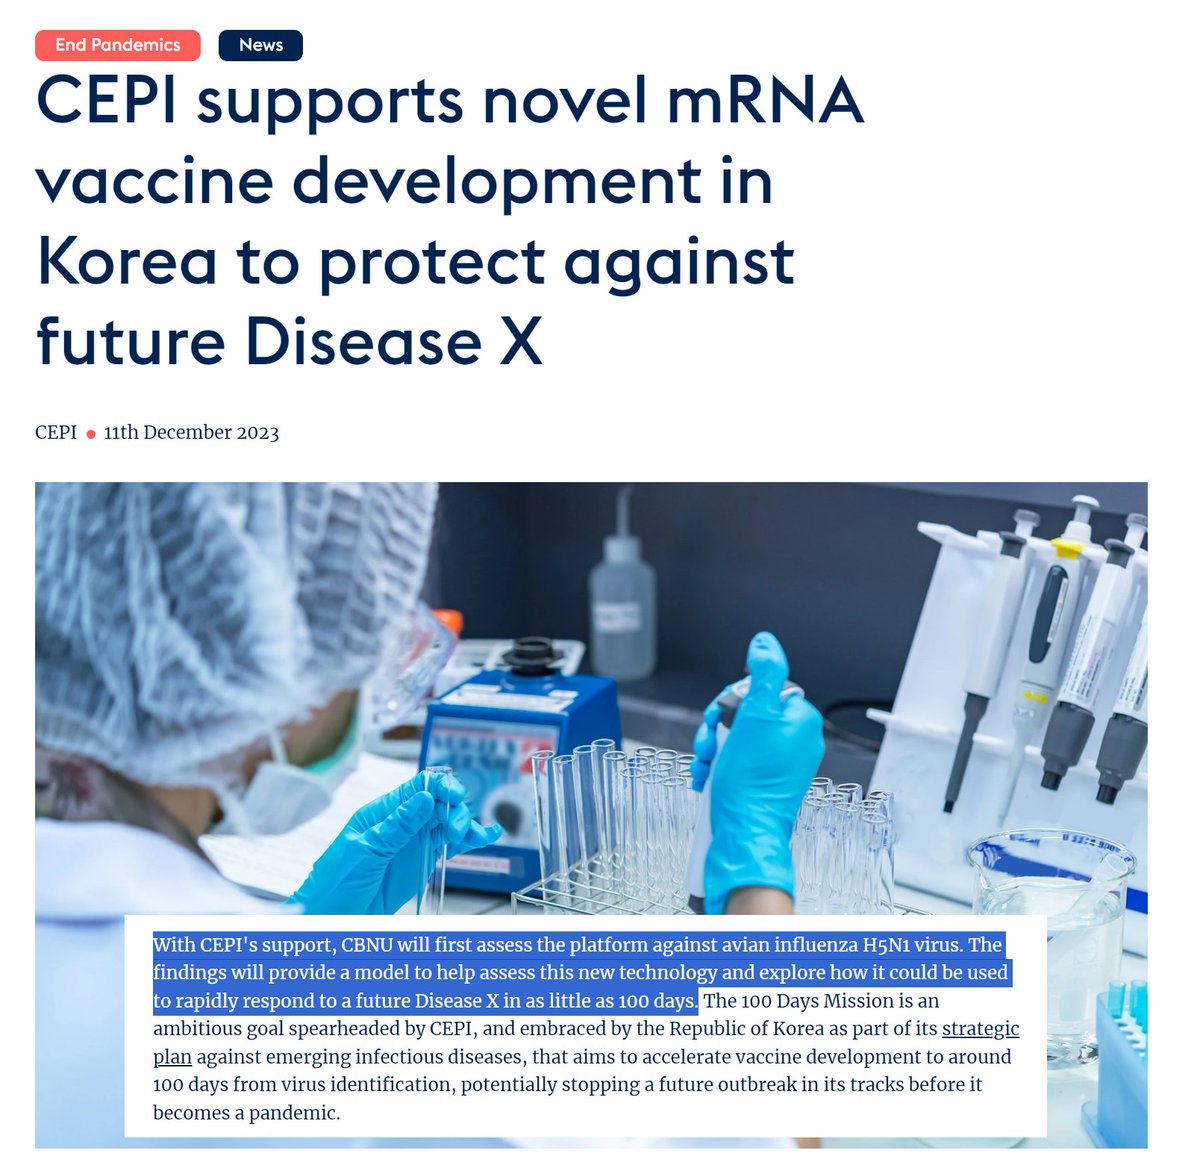 Too much investment in avian influenza vaccines to let this opportunity pass by for the Bio-Pharmaceutical Complex. @CEPIvaccines @CDCgov @CSL @BARDA have made massive investments. Self-amplifying mRNA vaccines coming you way. Once injected, now way to stop them!